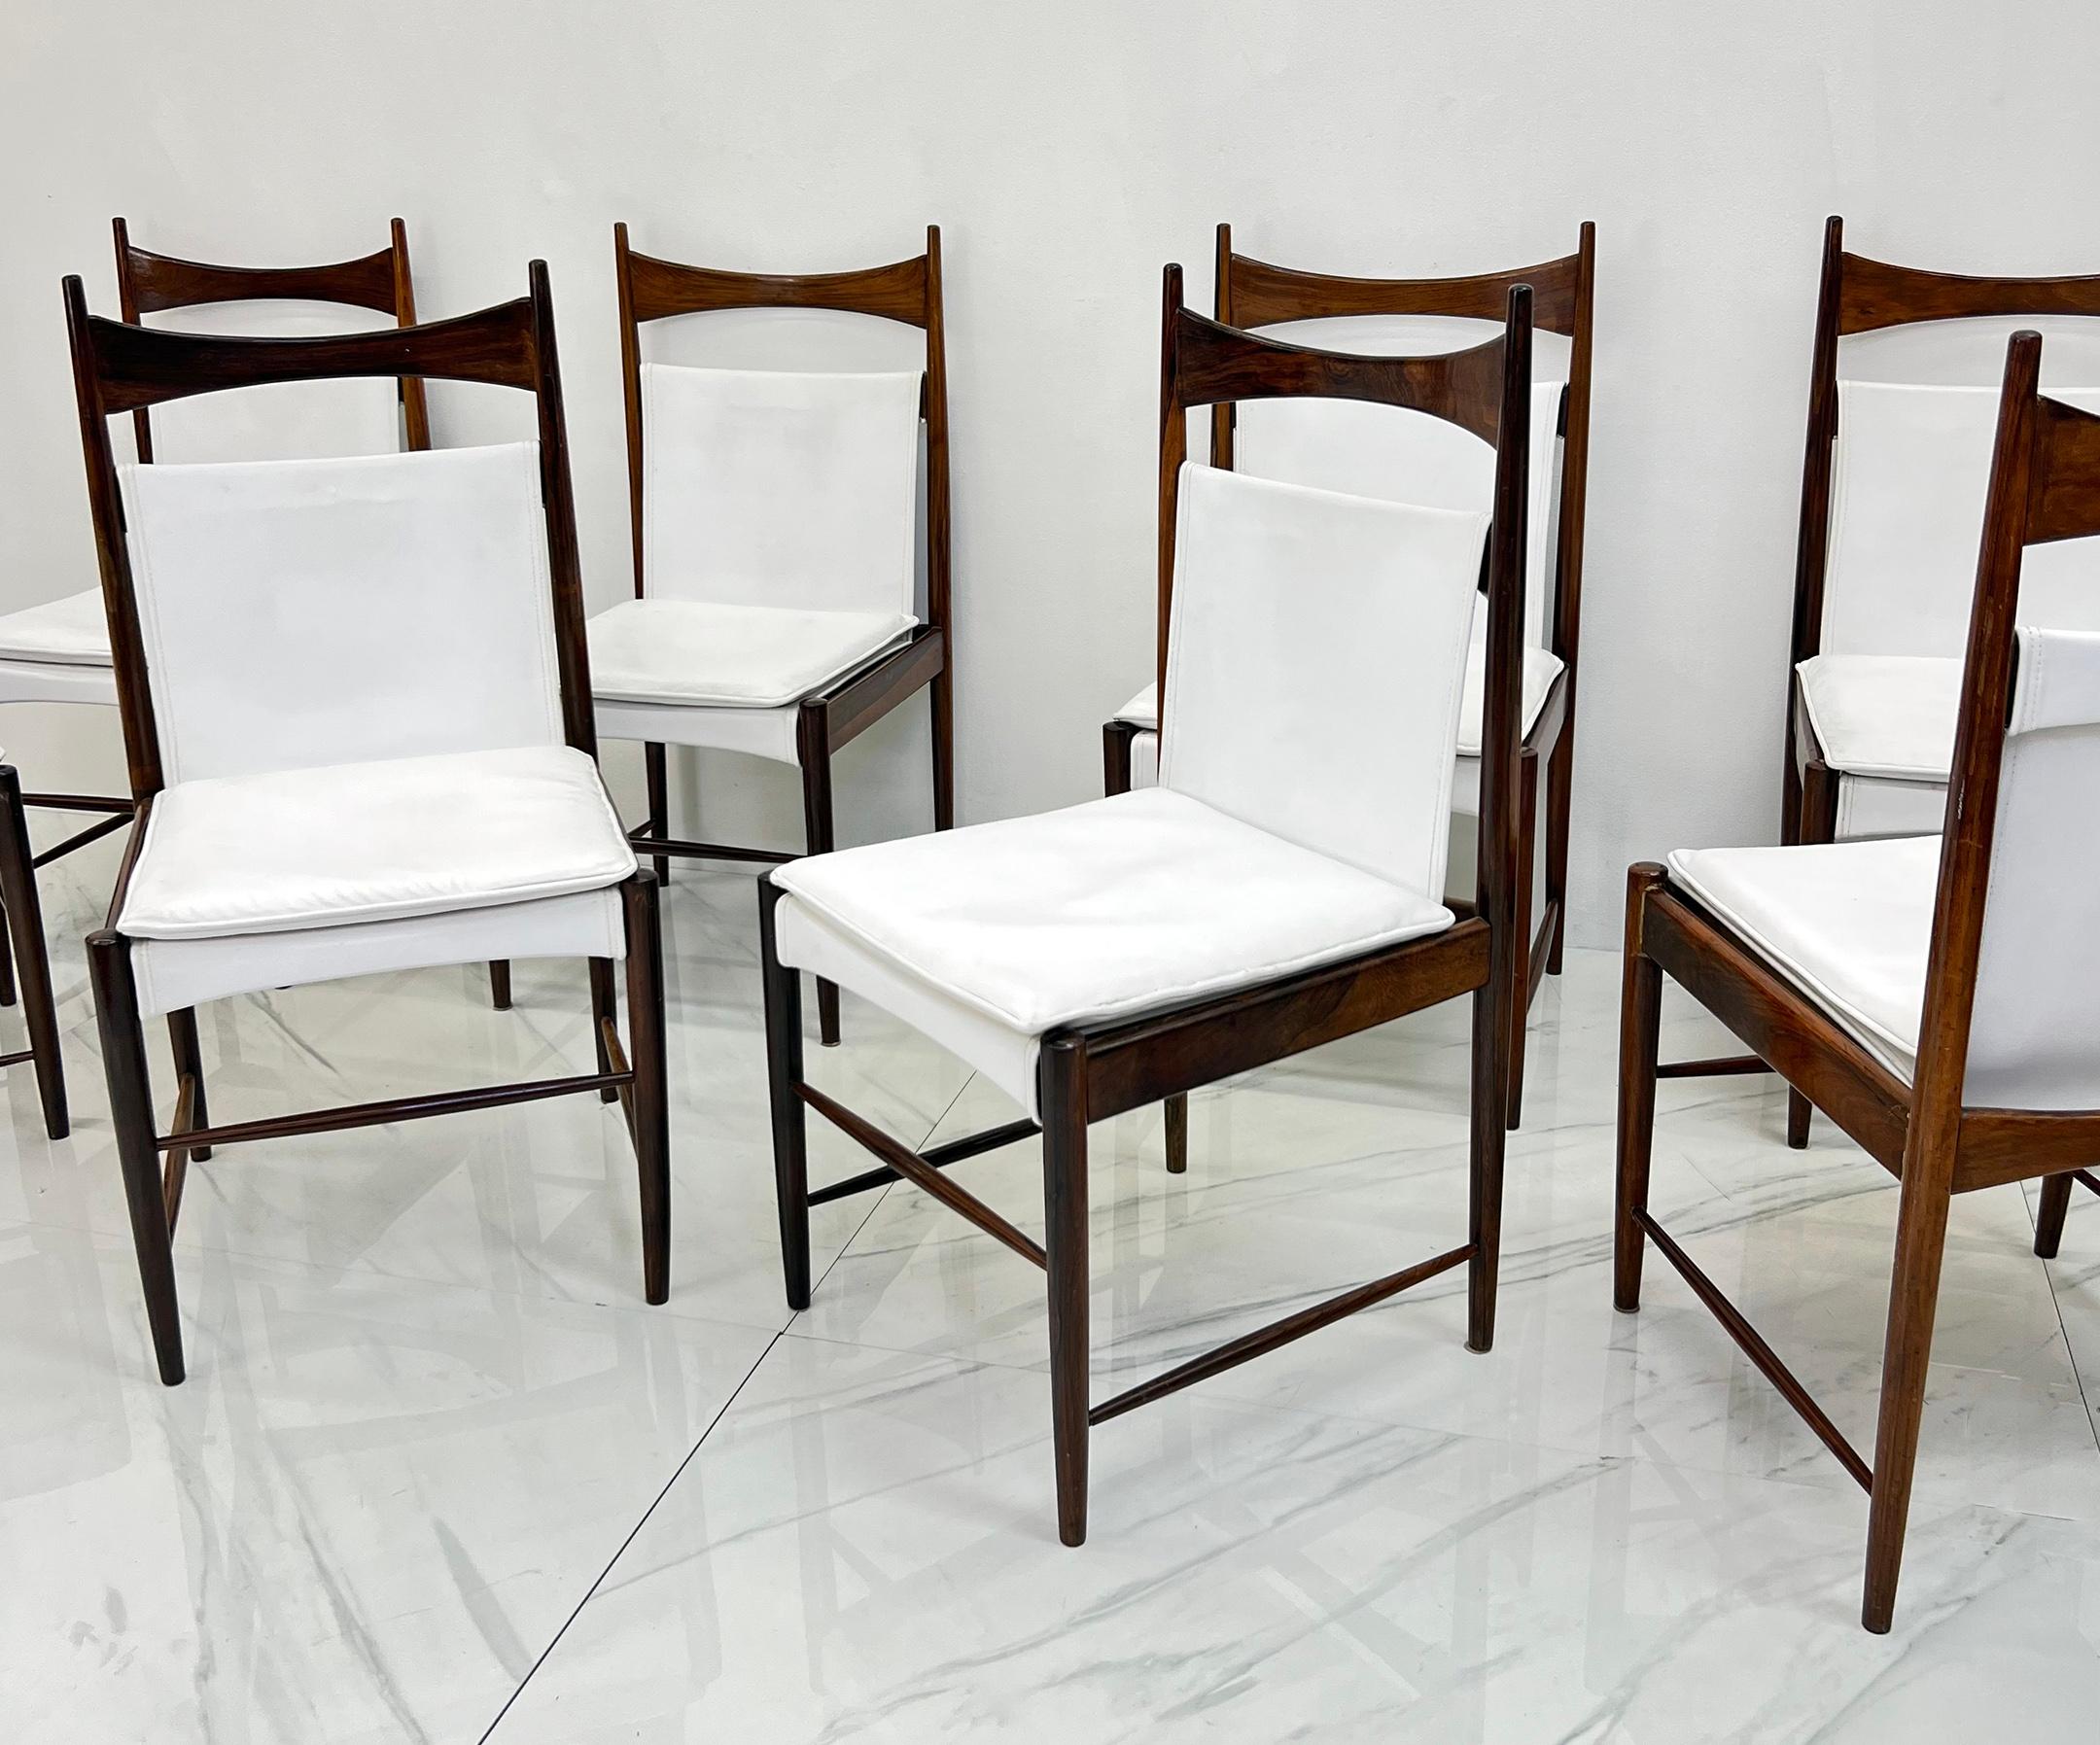 Set of 8 Rosewood Cantu Dining Chairs, Sergio Rodrigues, OCA Brazil, 1950's 2